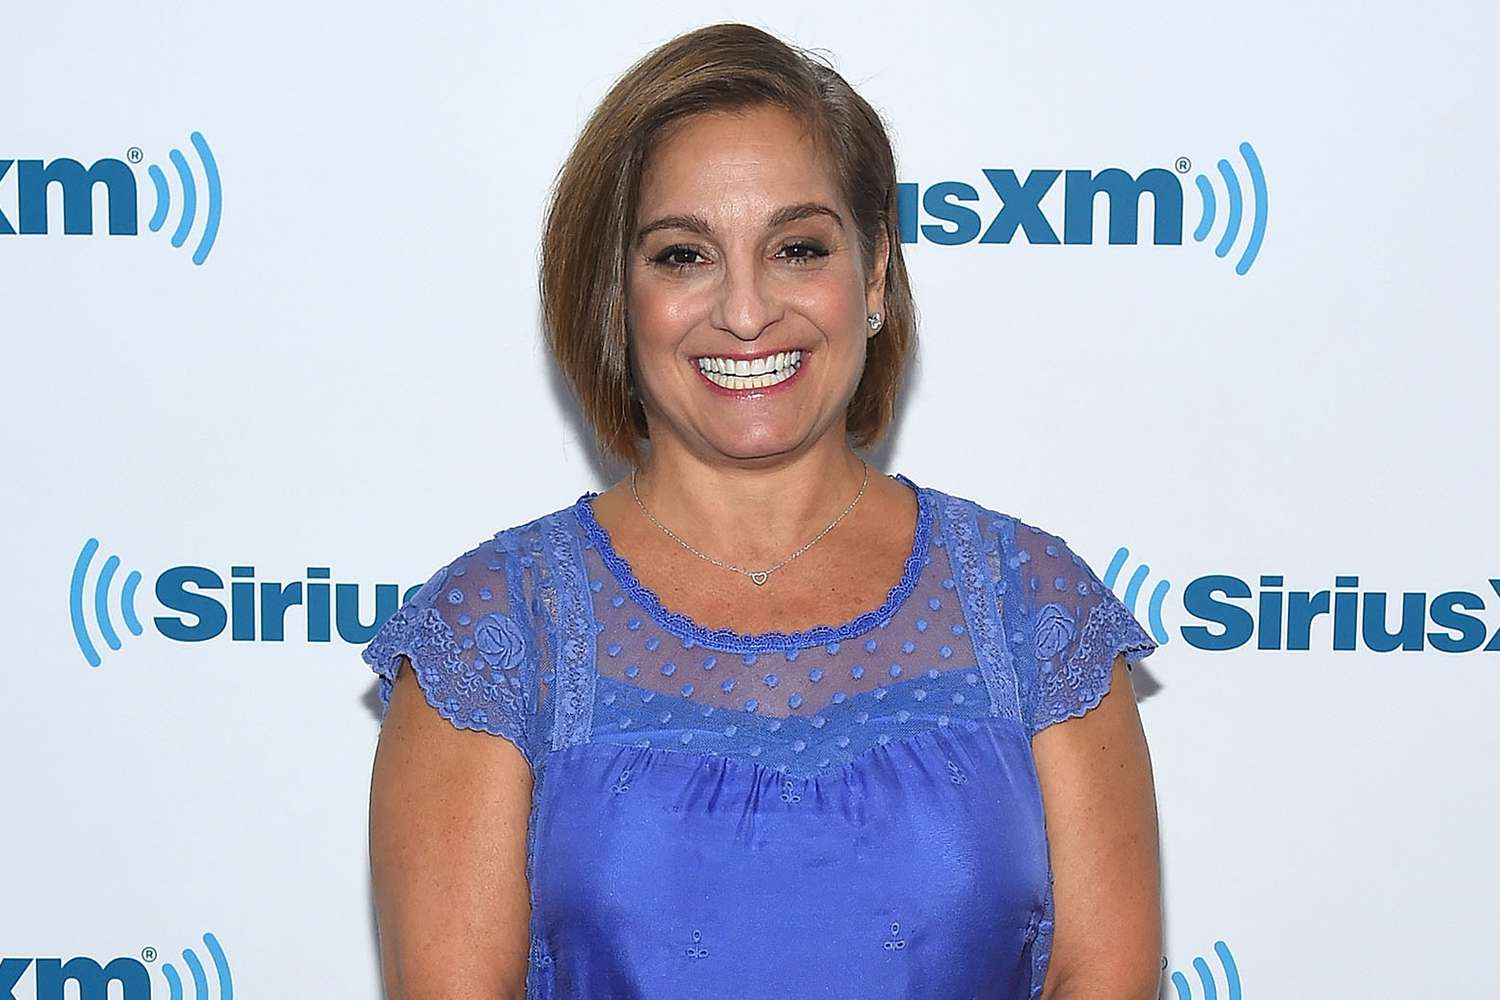 New Update On Mary Lou Retton’s Health: ‘Scary Setback’ Lands Her In ICU